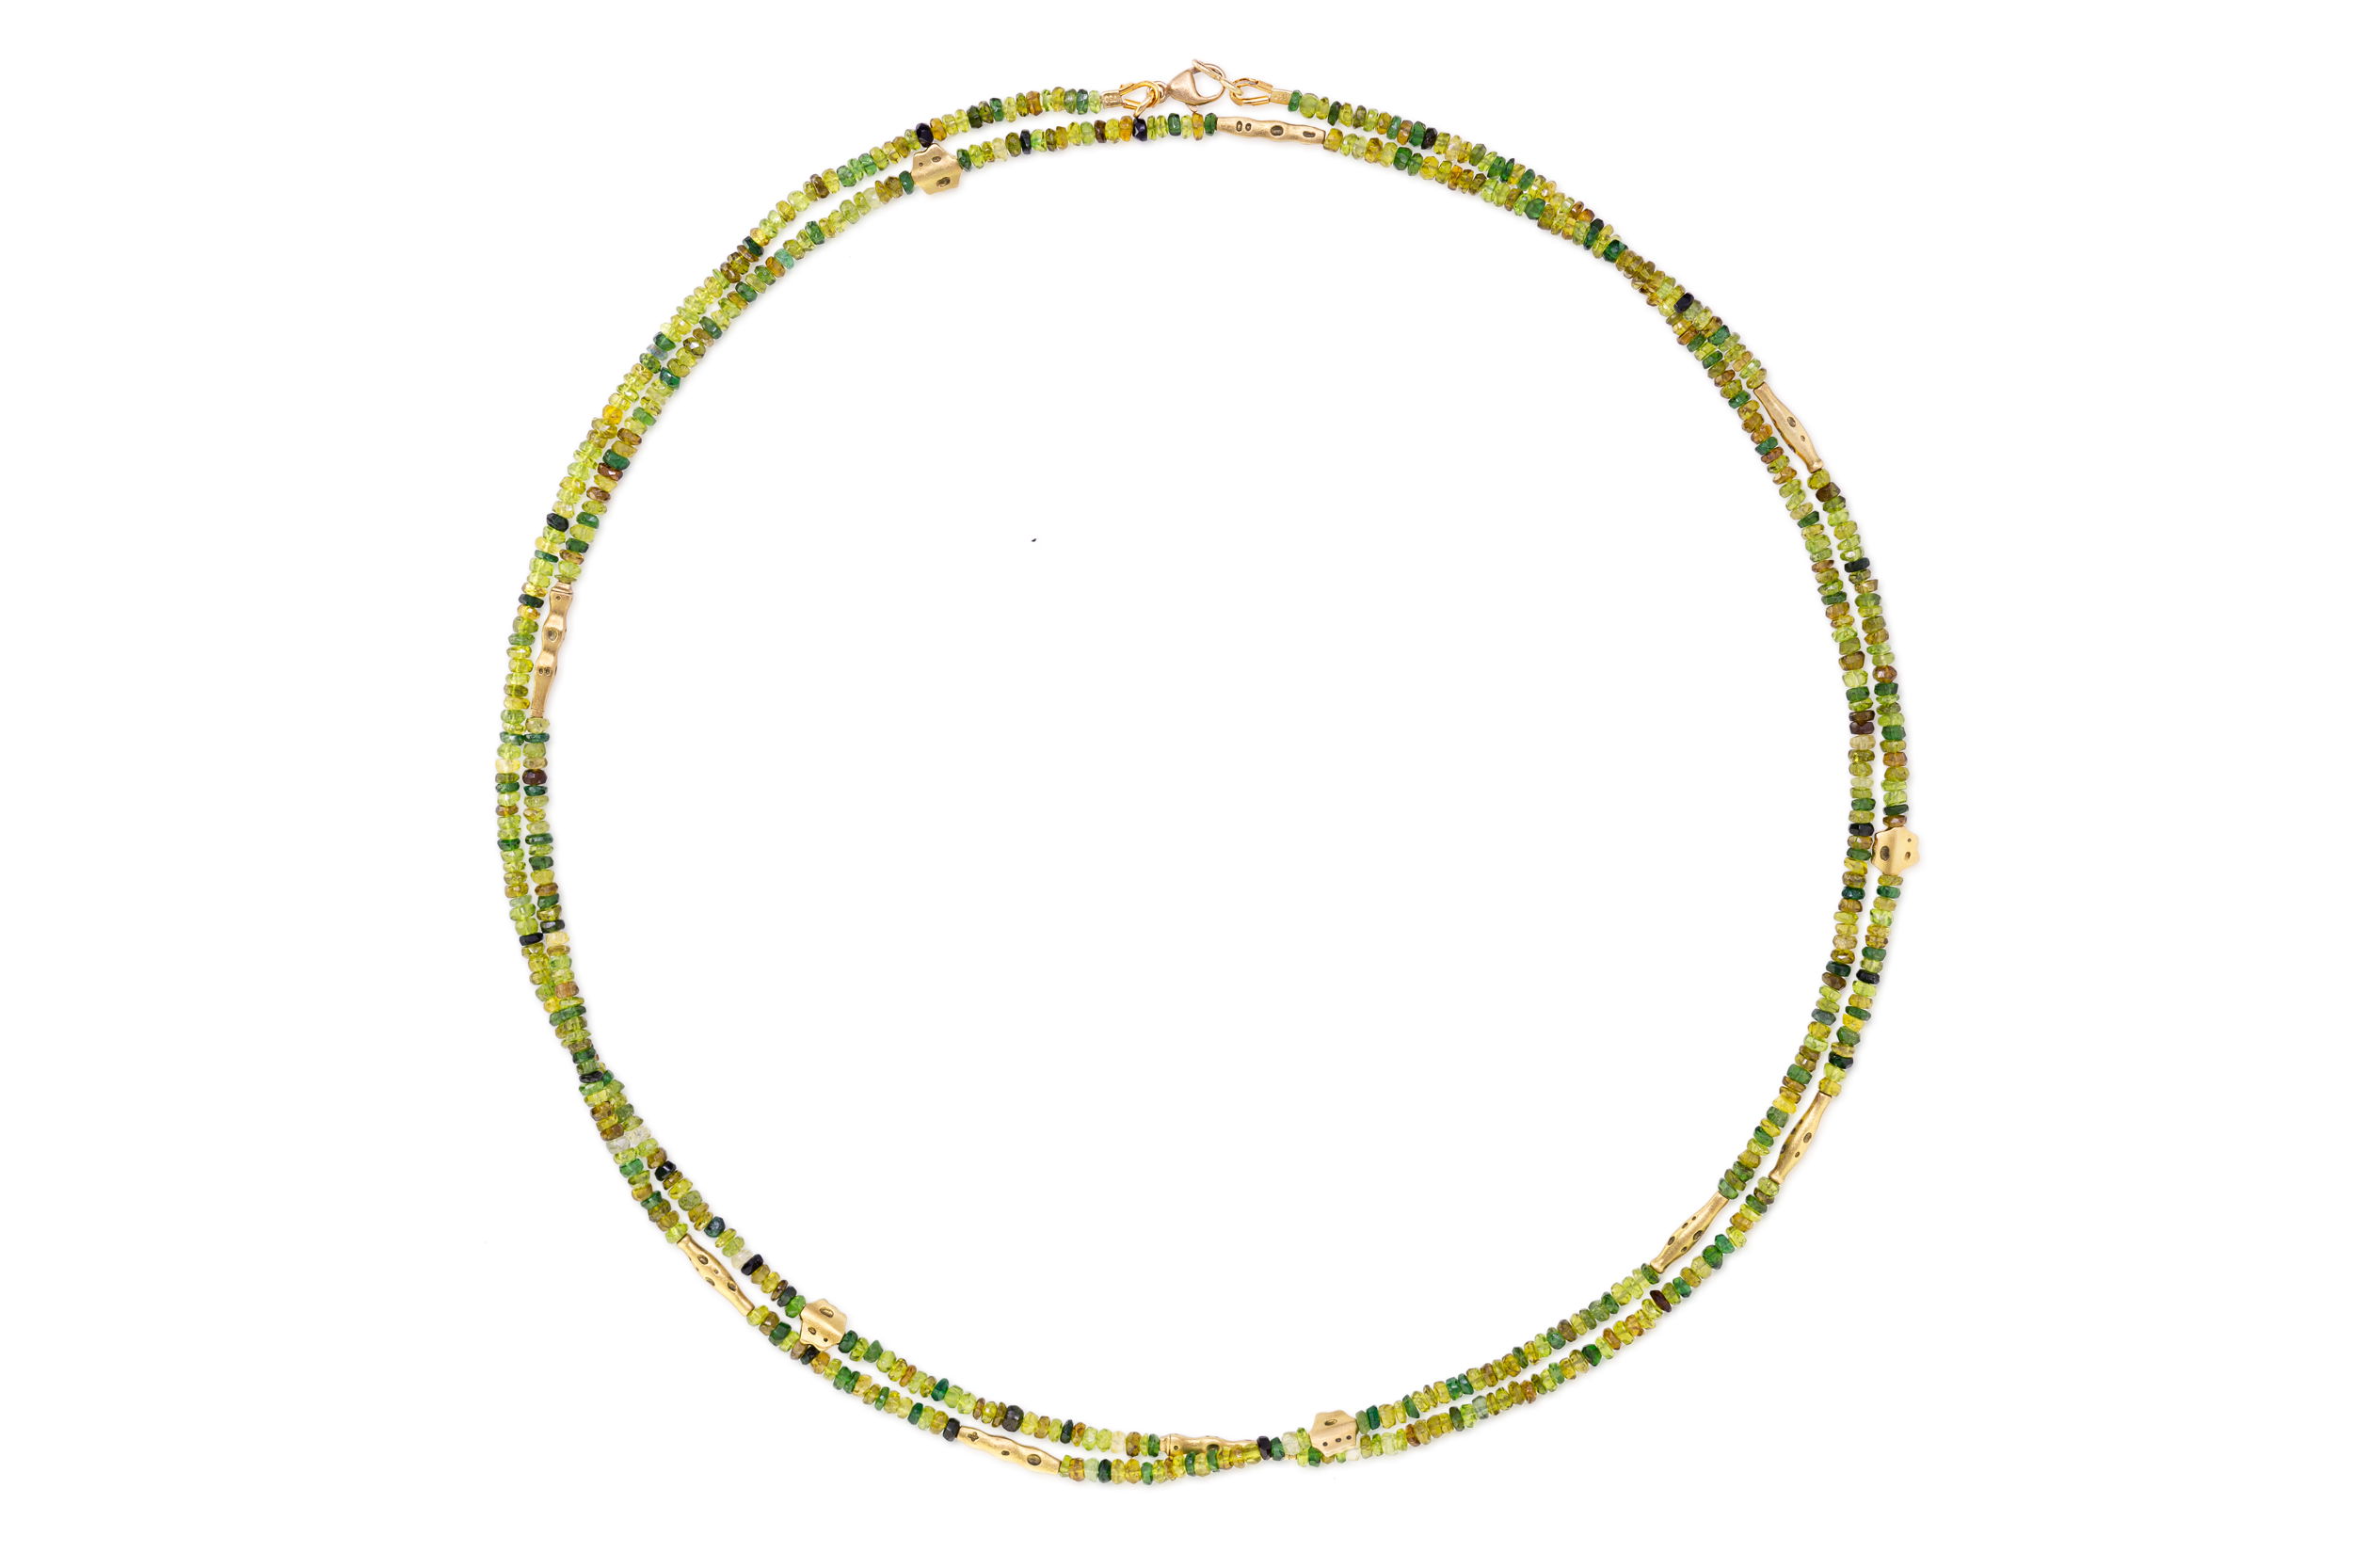 Flora Beaded Necklace with Green Tourmaline in 18kt Yellow Gold - 38"